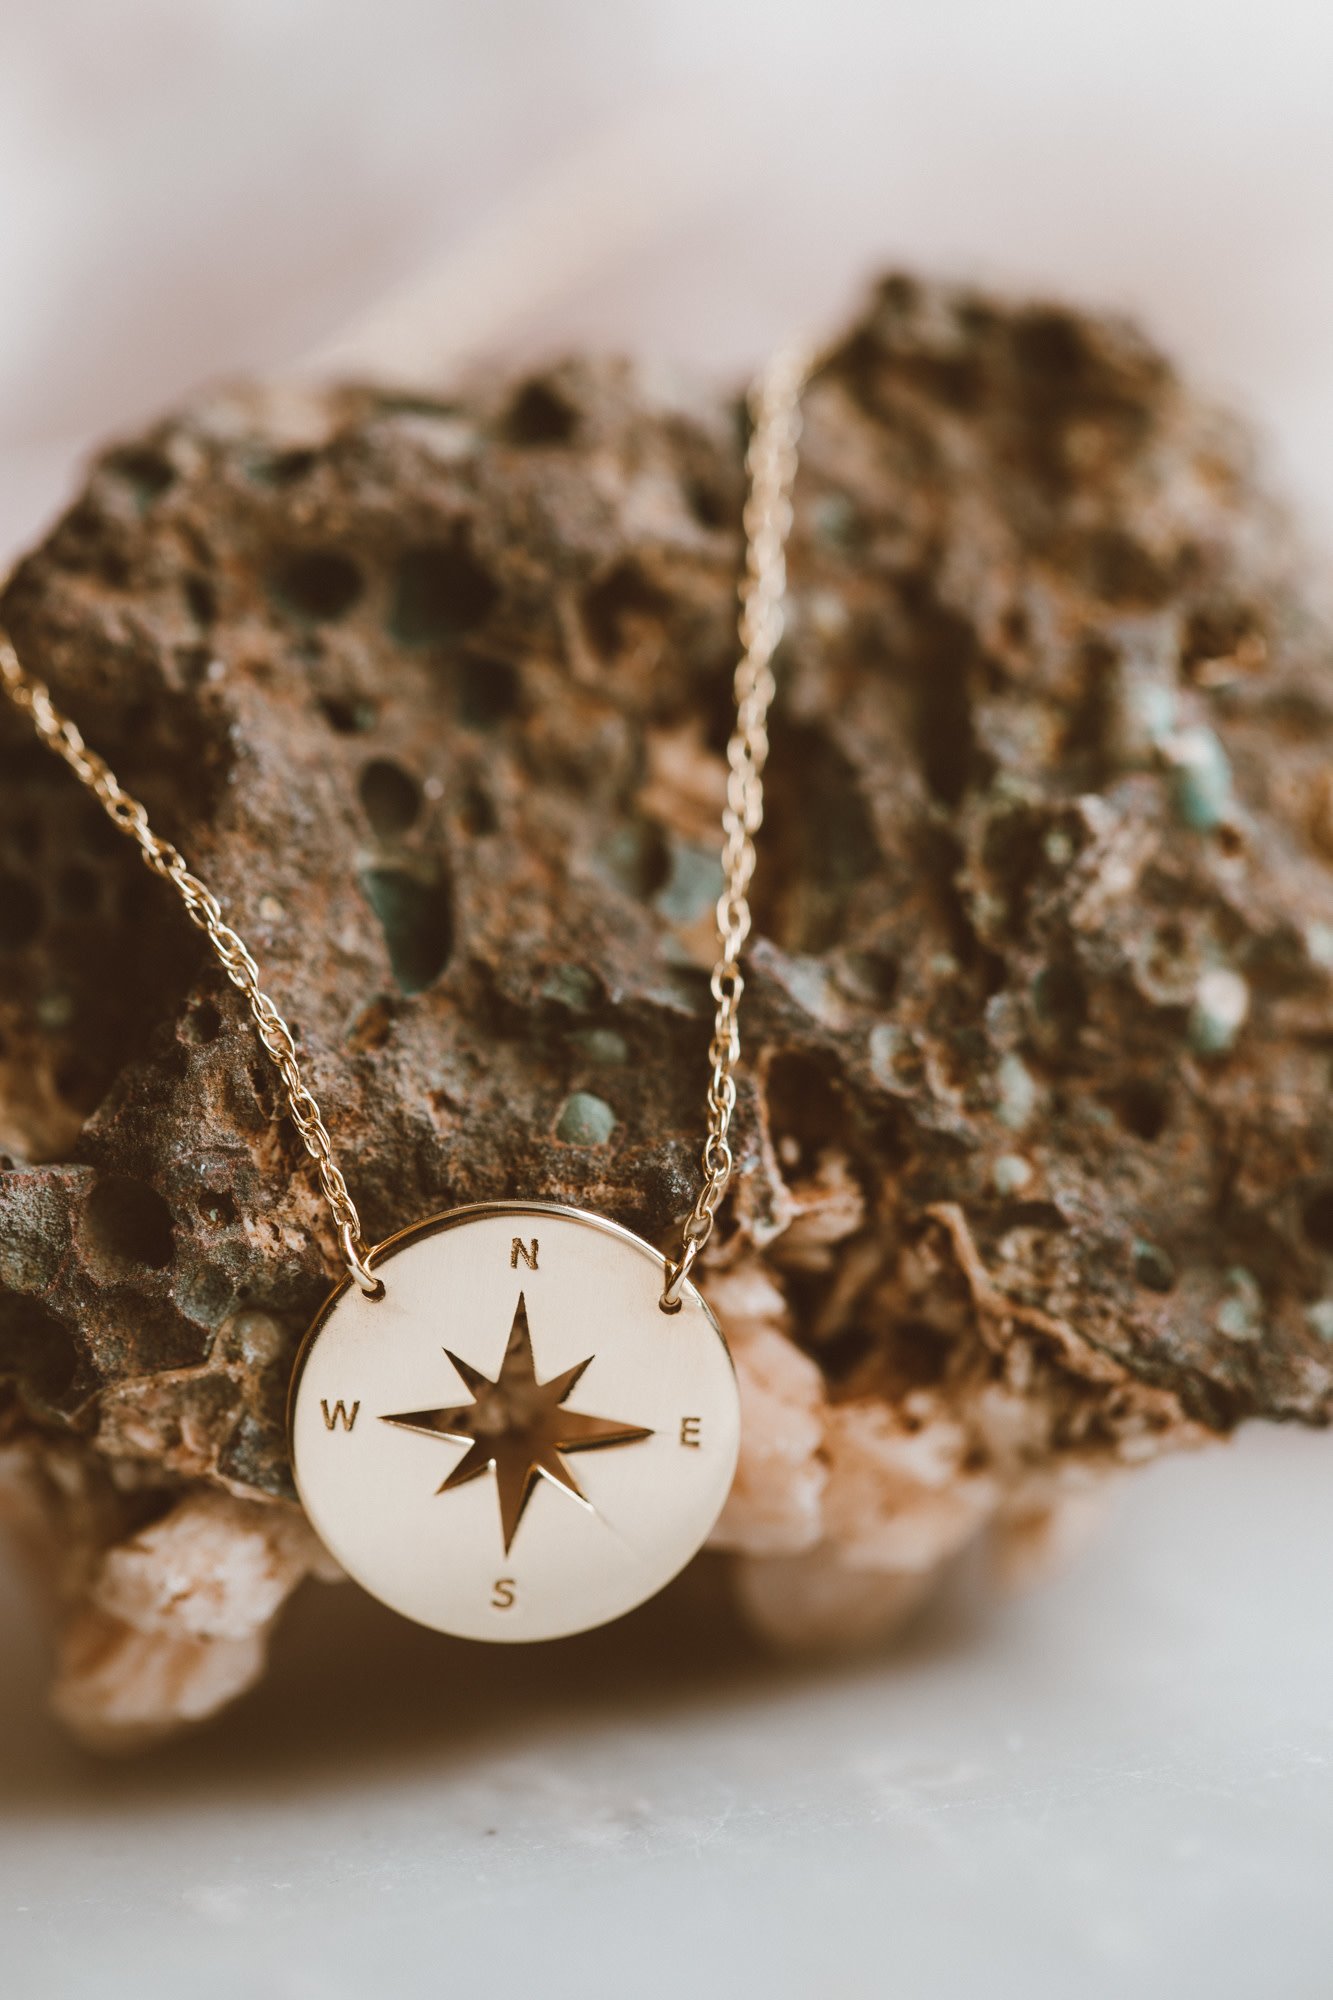 NL Compass necklace - Gold-toned necklace with compass pendant.